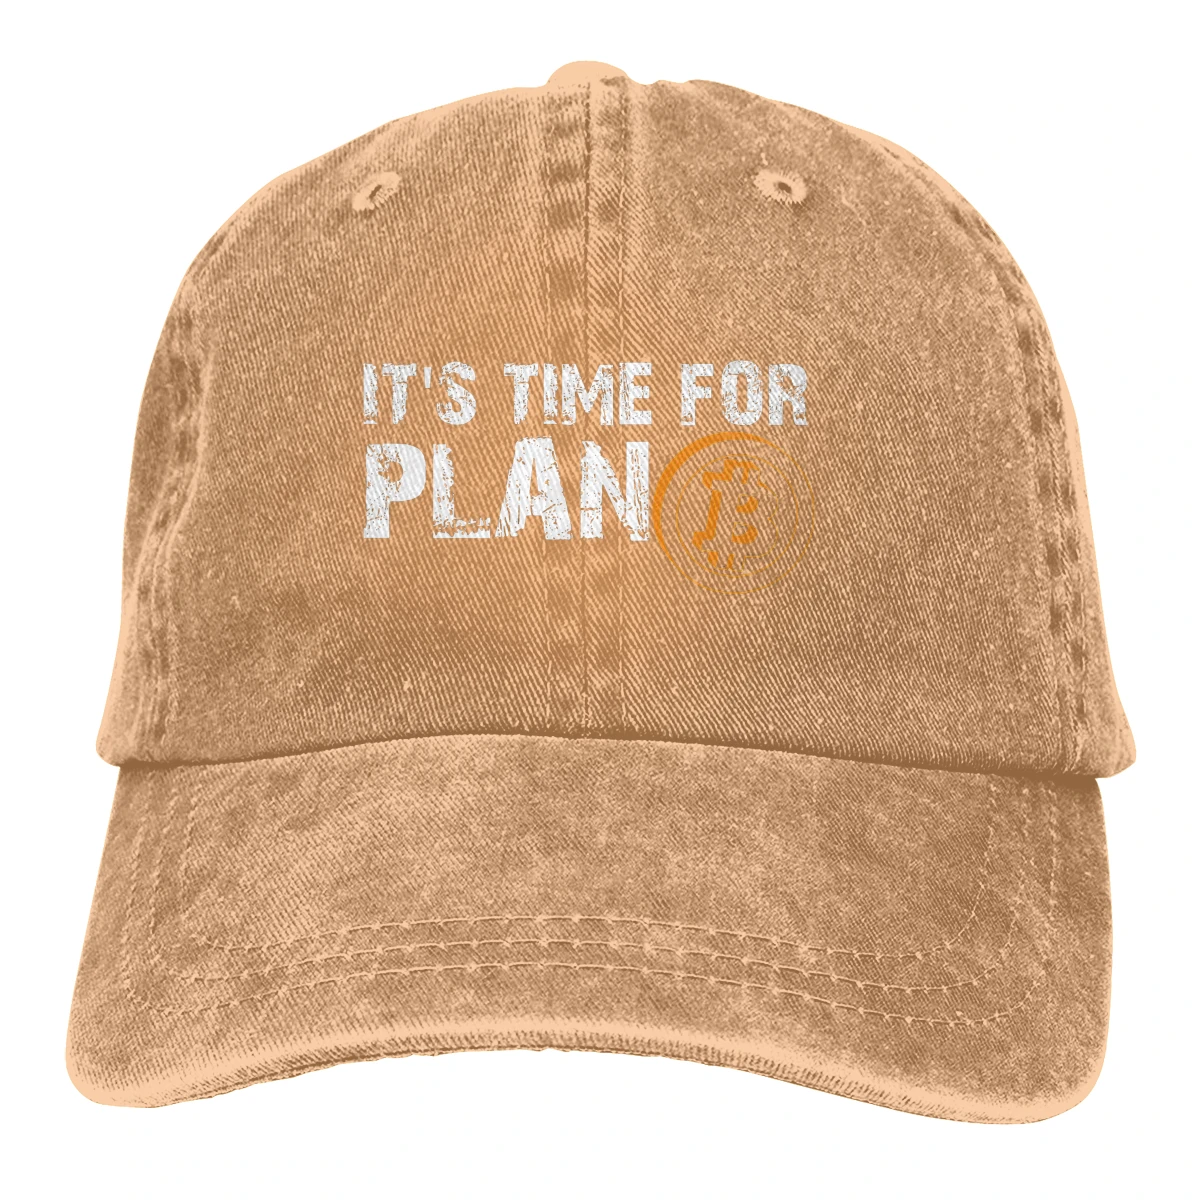 

Pure Color Print Dad Hats It's Time For Plan B Women's Hat Sun Visor Baseball Caps Bitcoin Cryptocurrency Miners Meme Peaked Cap